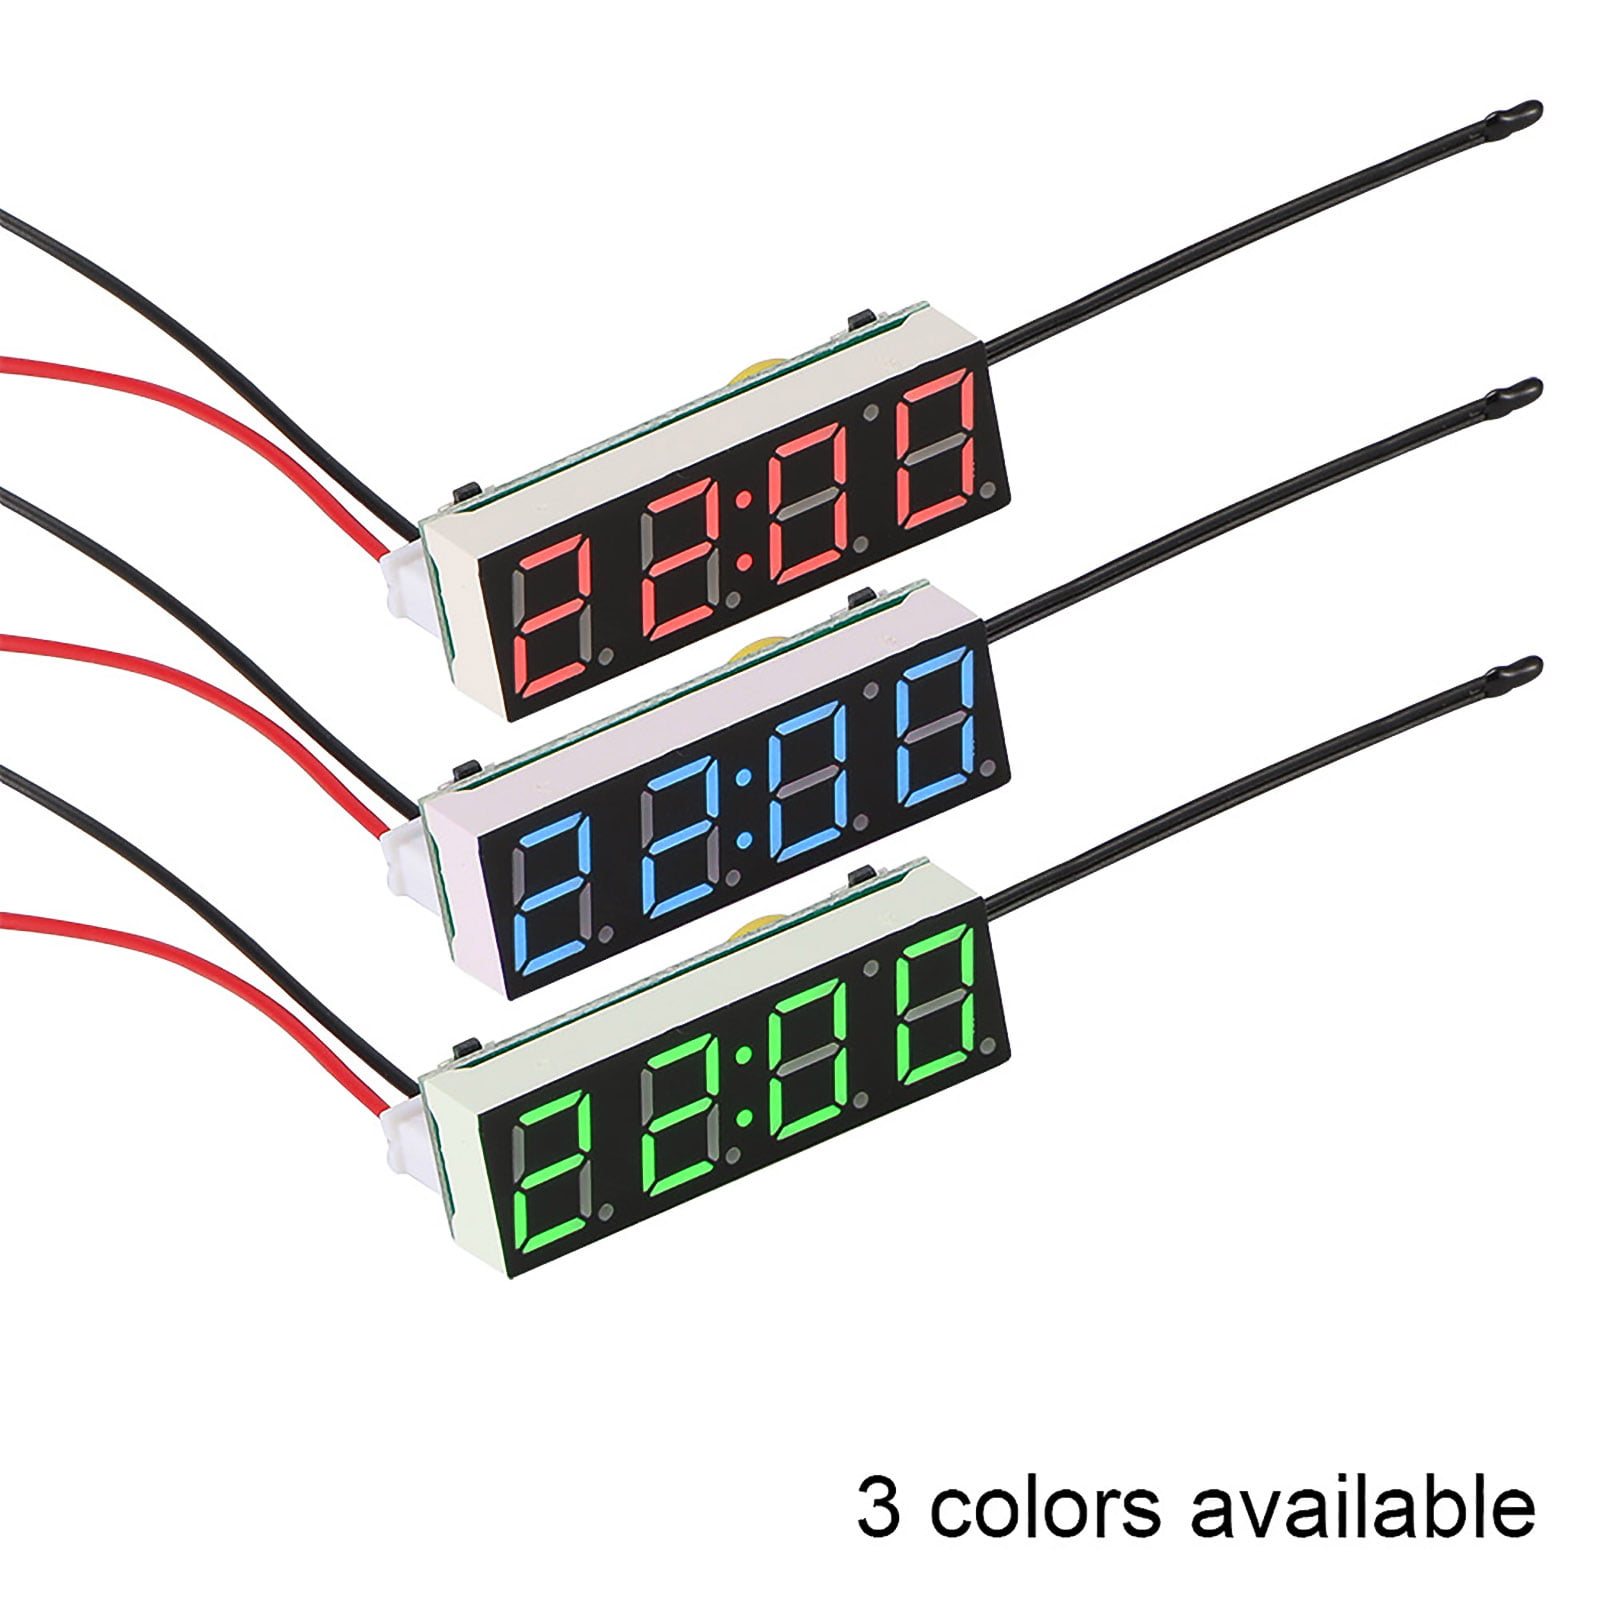 Vvciic Car led Clock Electric Clock Digital Timer Temperature Clock with Green/Blue/Red Light Car Decorative Accessories 